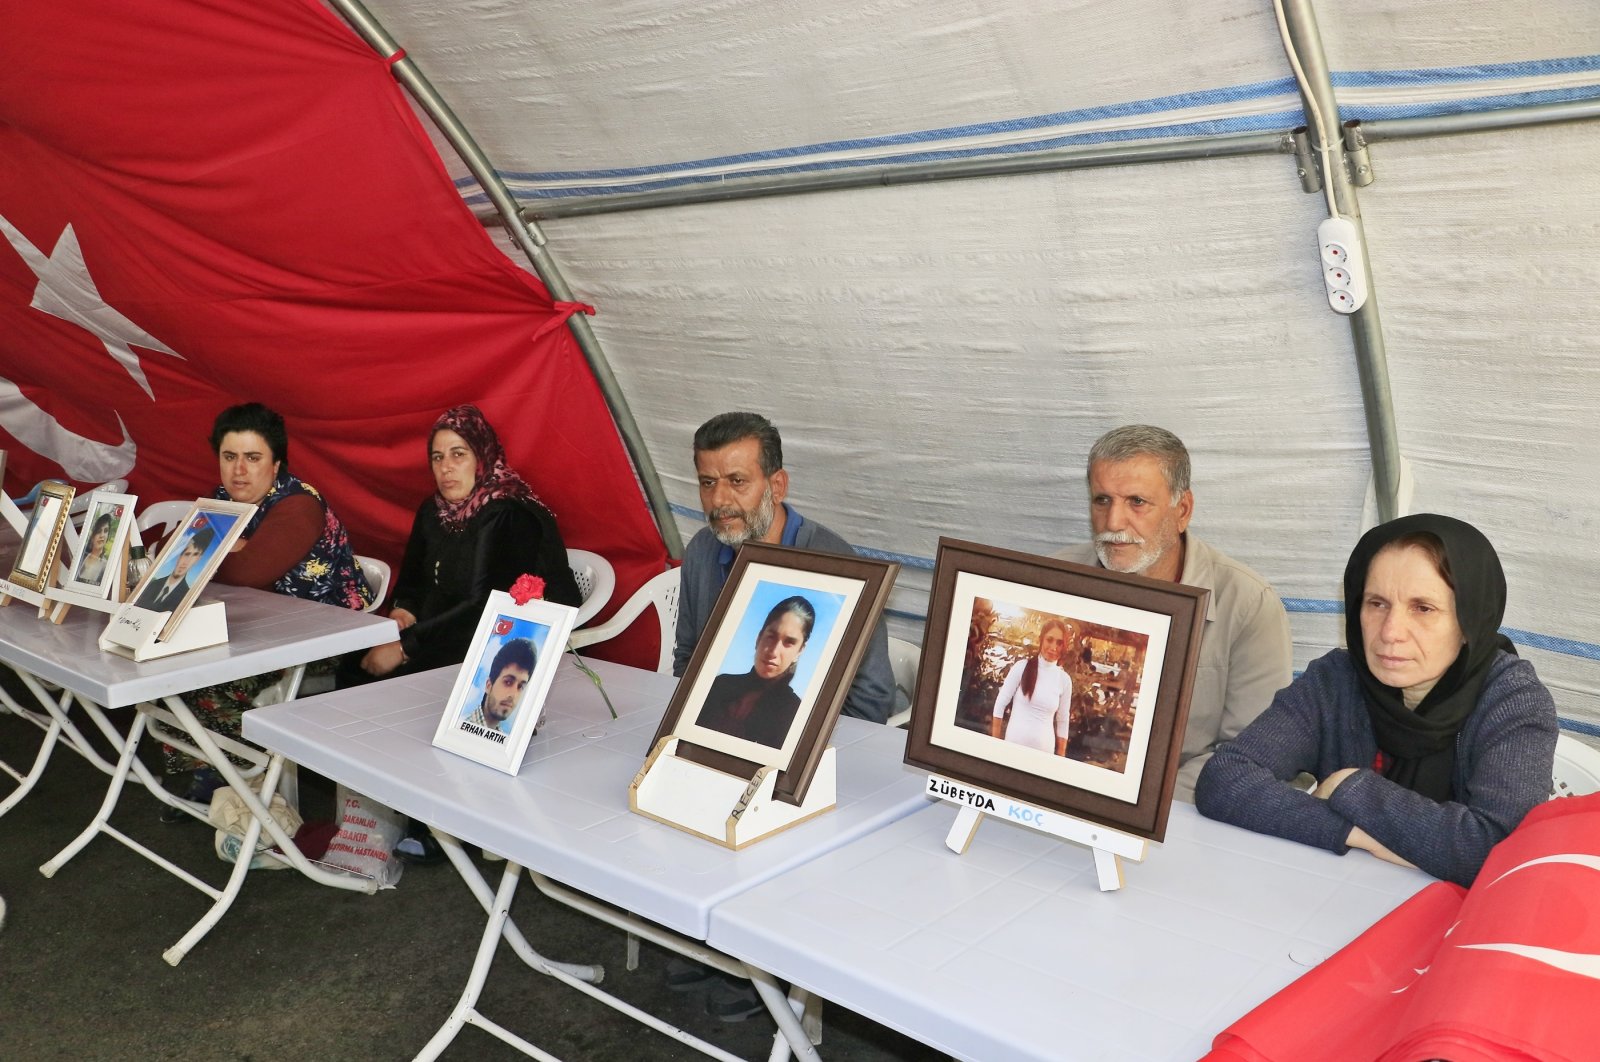 Since Sept. 3, 2019, families whose children have been abducted or forcibly recruited by the PKK terror group have been camping outside the Diyarbakır offices of the Peoples&#039; Democratic Party (HDP), a party the Turkish government said has links to the PKK, Turkey, May 28, 2022. (DHA Photo)